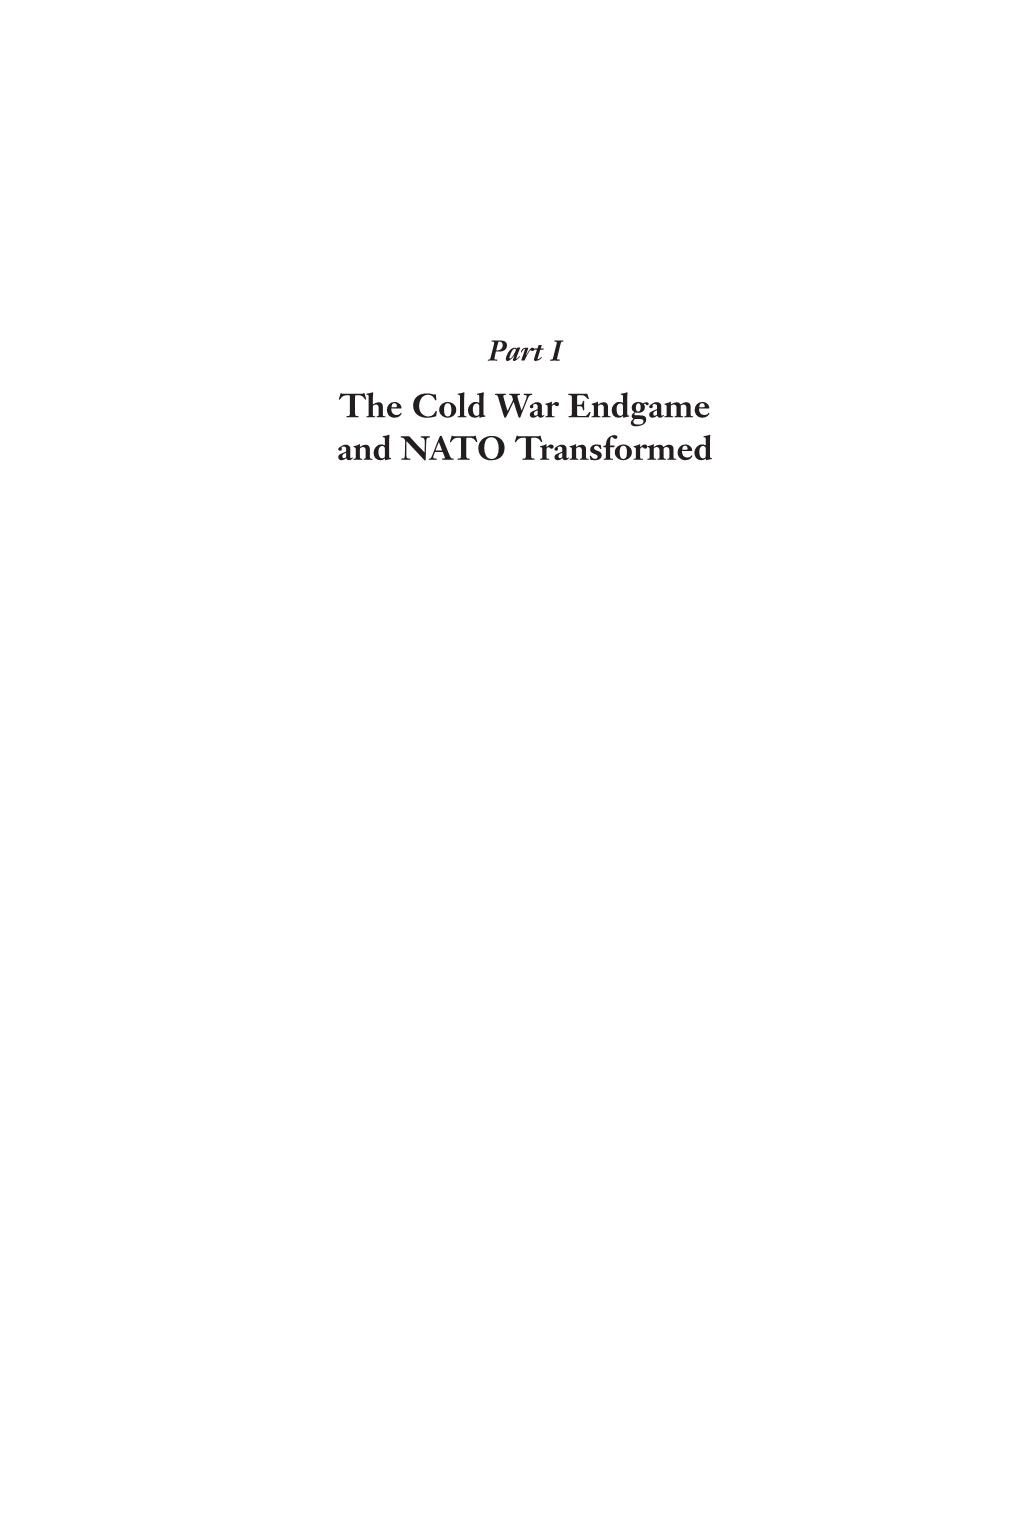 The Cold War Endgame and NATO Transformed